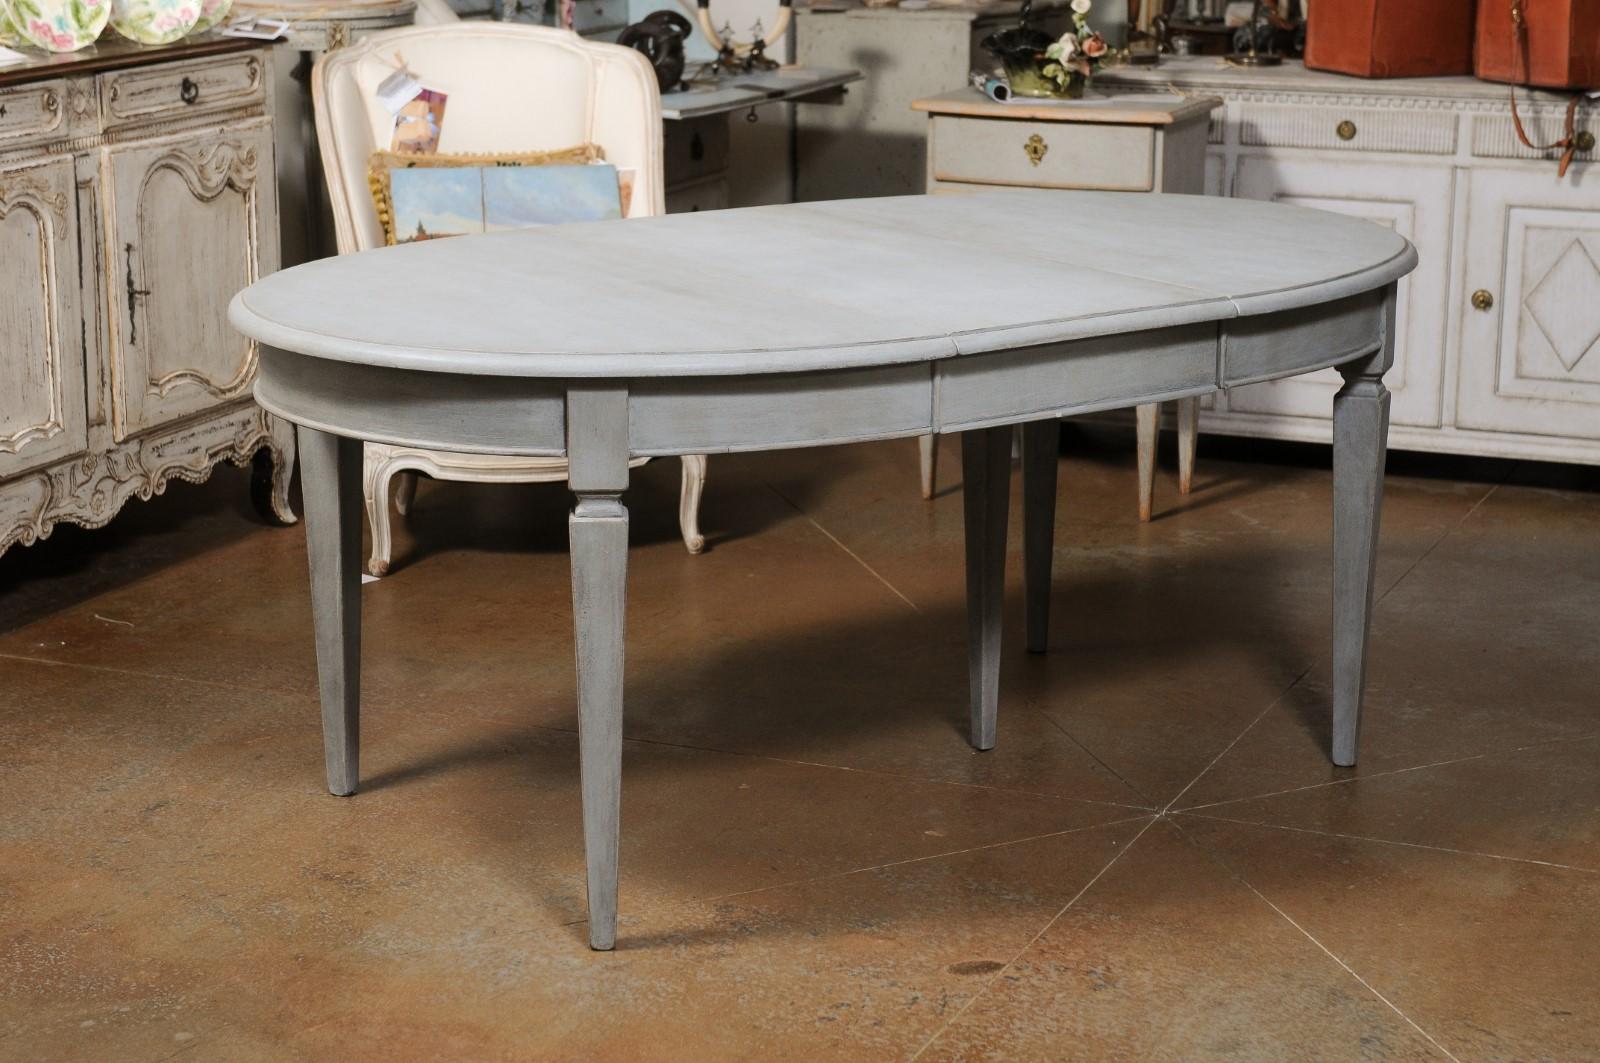 Wood Swedish Gustavian Style Dining Room Table with Custom Leaves and Tapered Legs